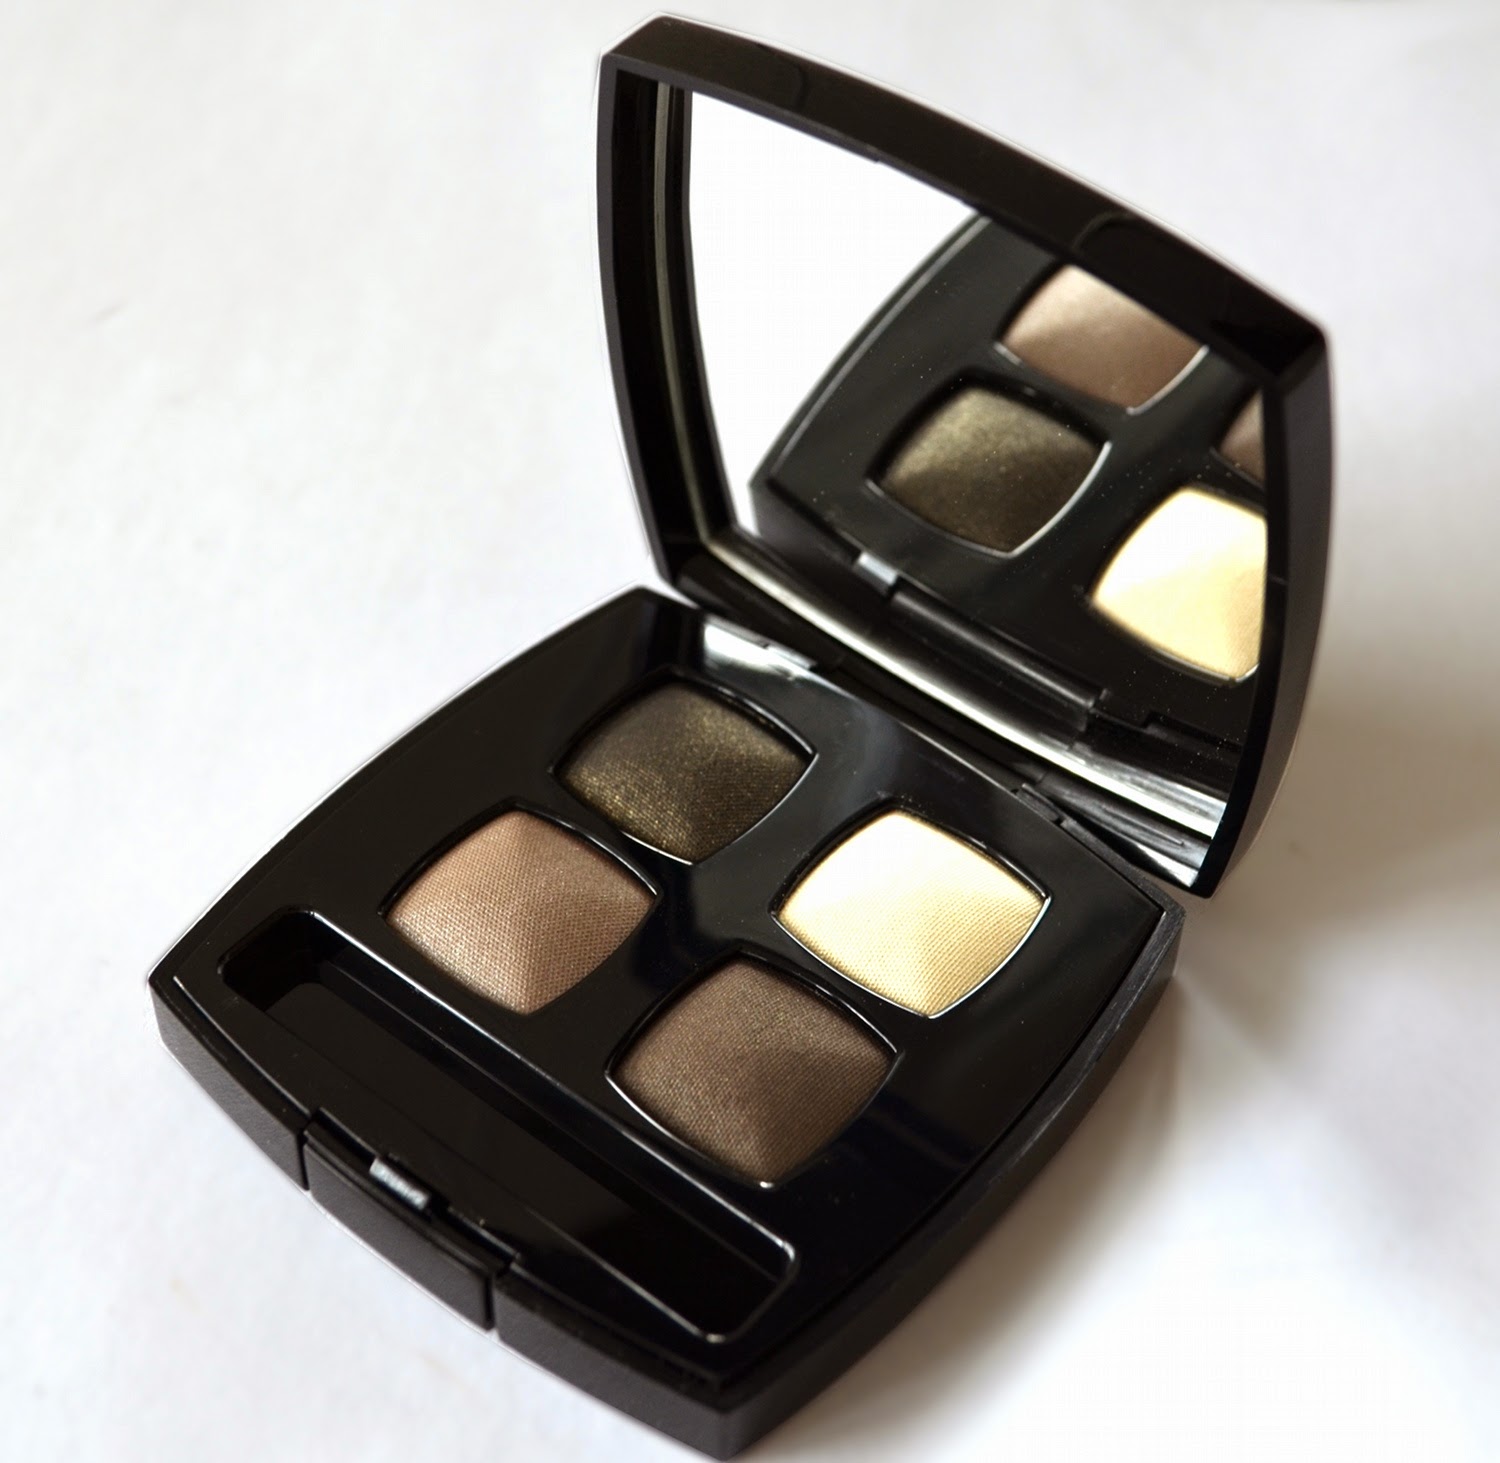 The Beauty Look Book: Chanel Les 4 Ombres Multi-Effect Quadra